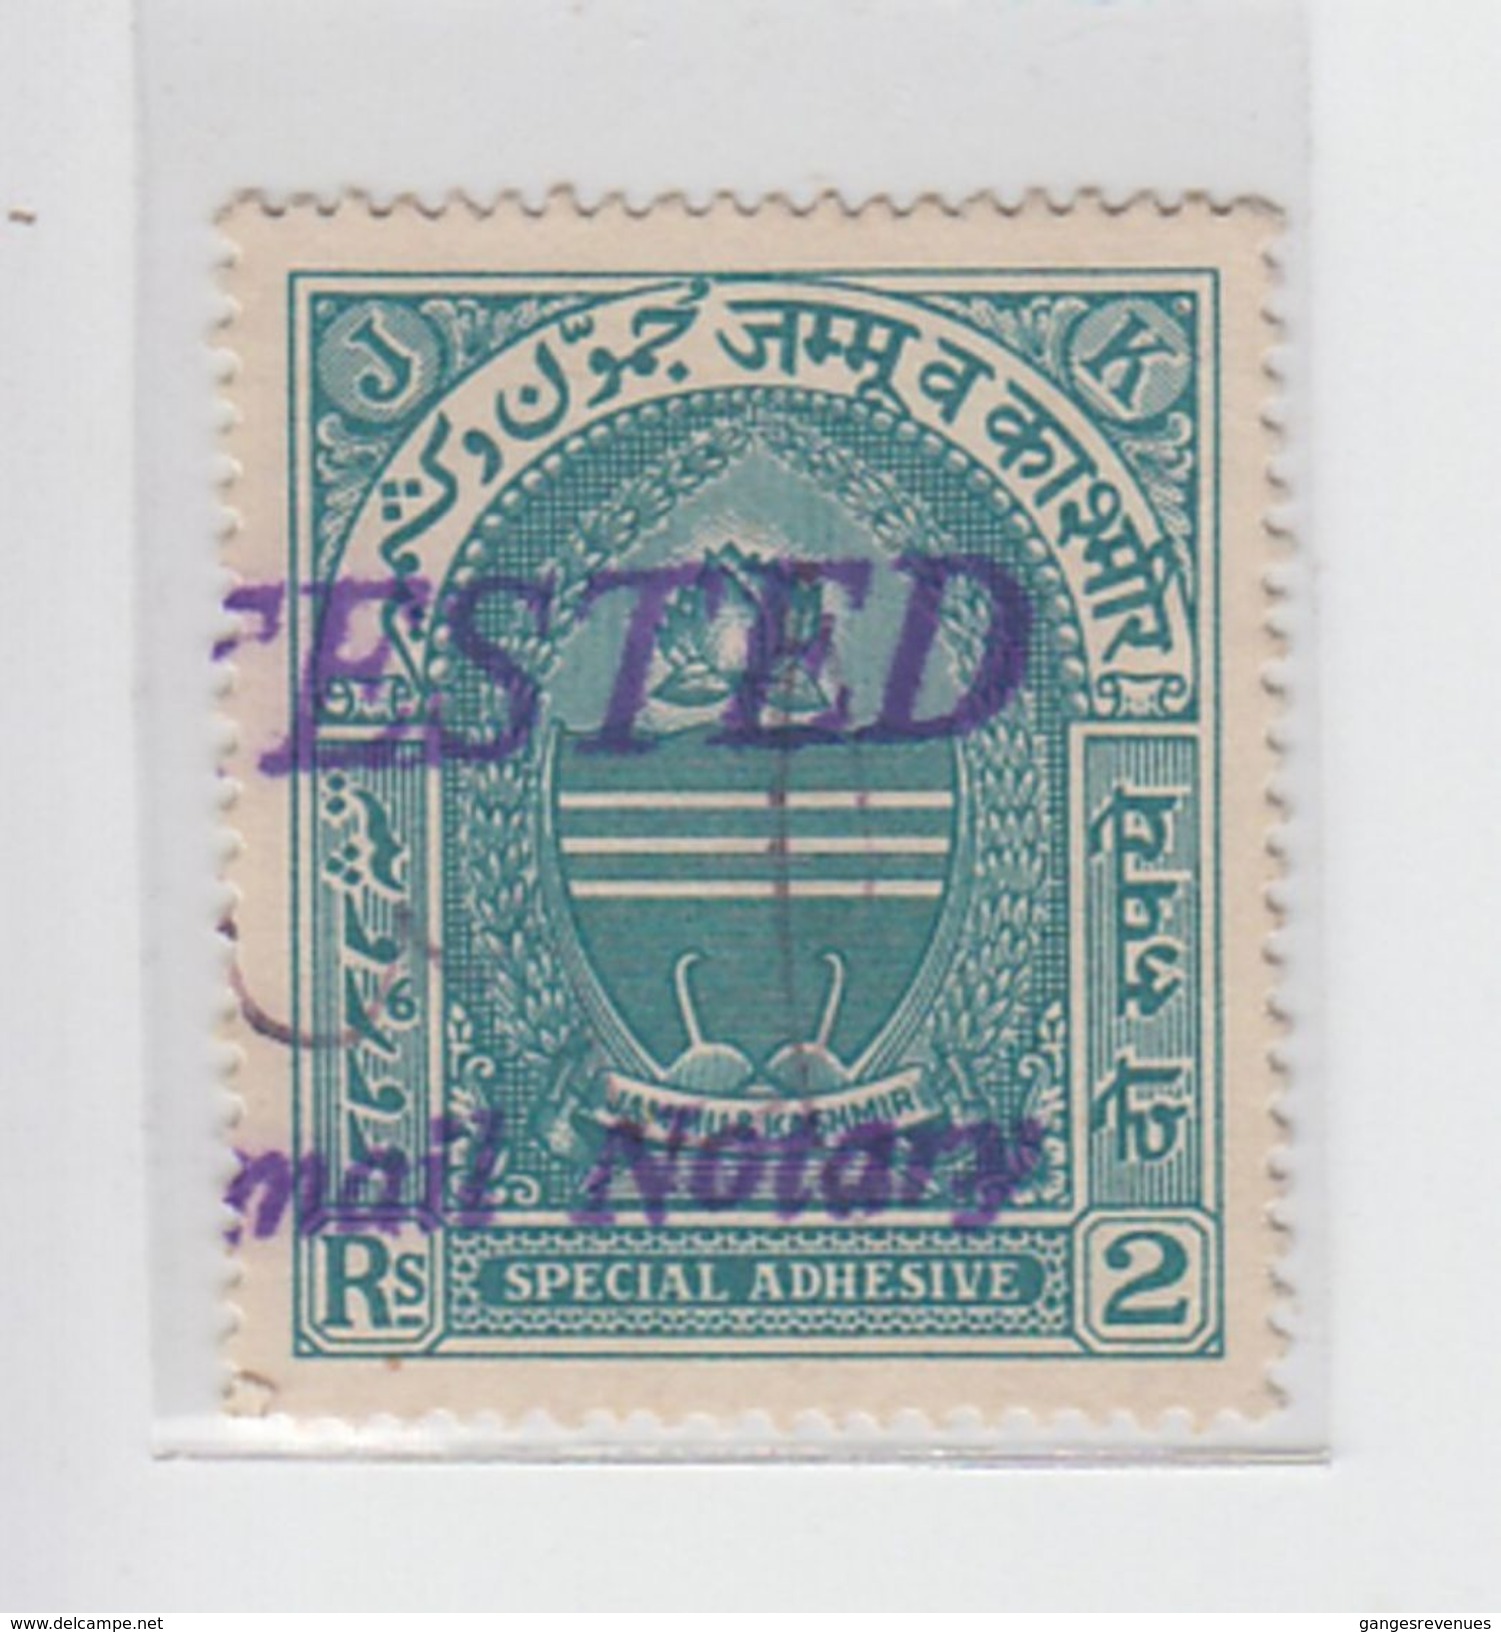 JAMMU & KASHMIR State  2 Rupees  Special Adhesive  Revenue  Type 3  #  99923  Inde Indien  India Fiscaux Fiscal Revenue - Jummo & Cachemire